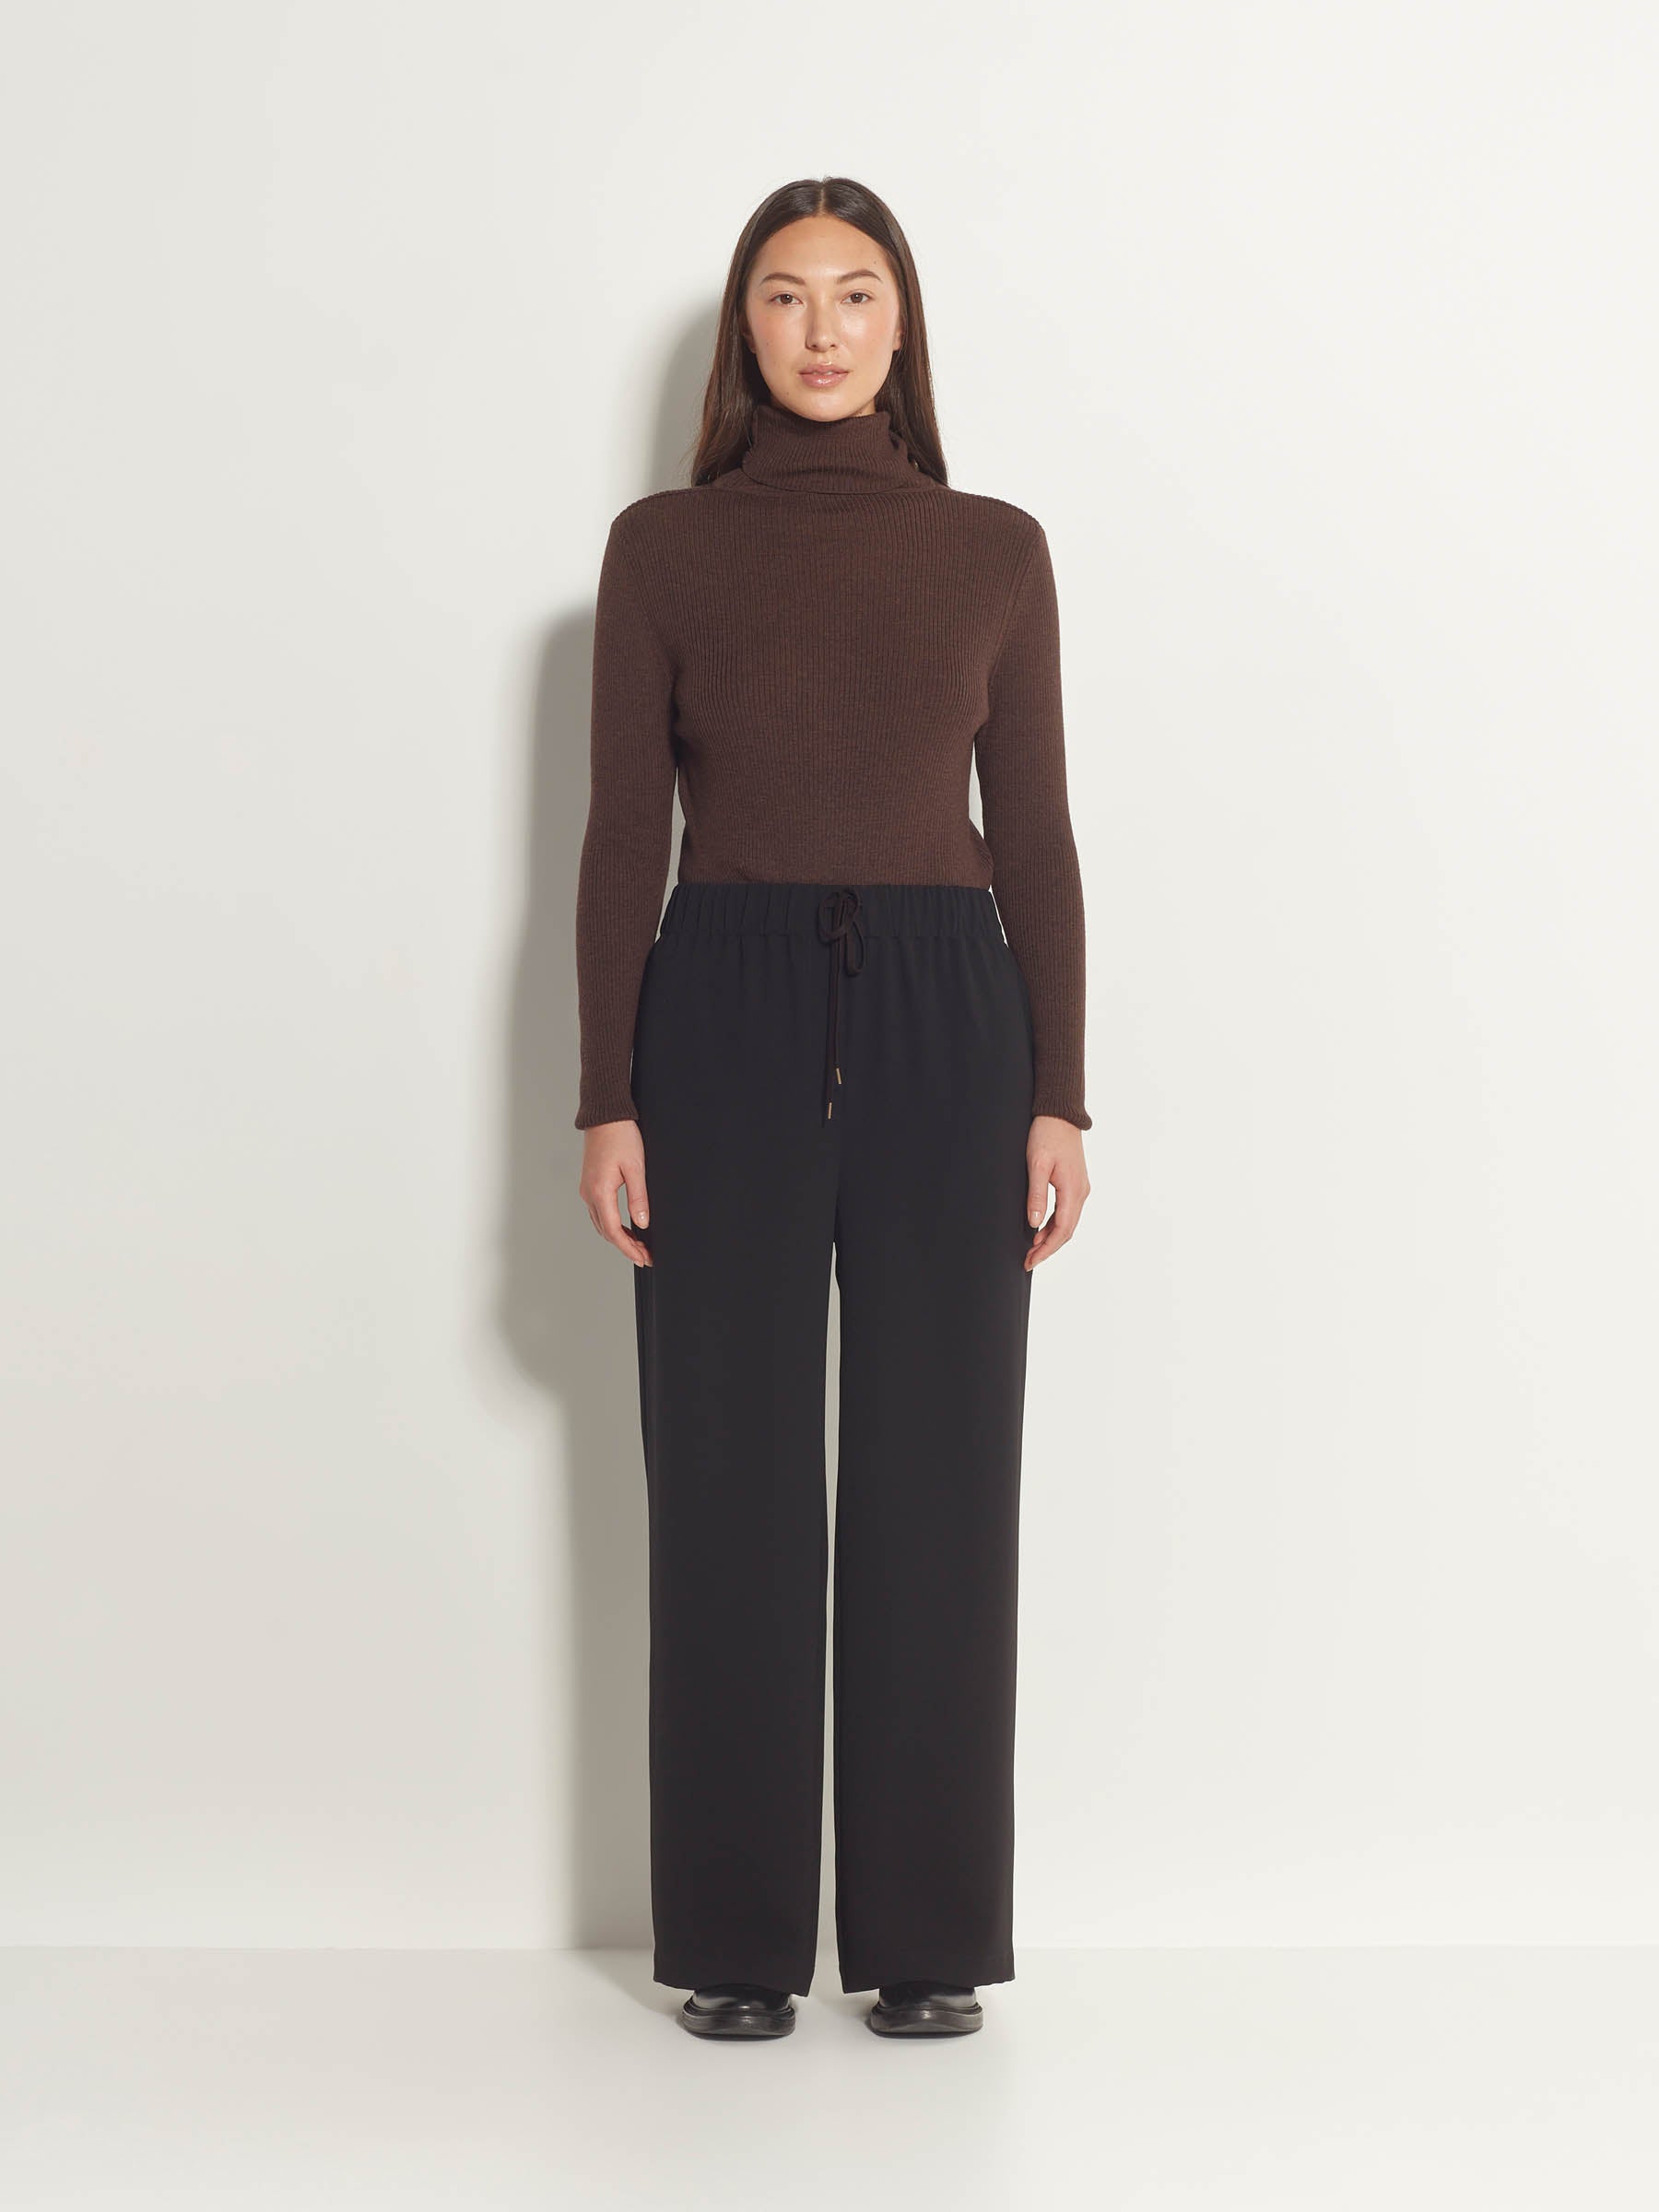 Pia Pant (Luxe Suiting) Black